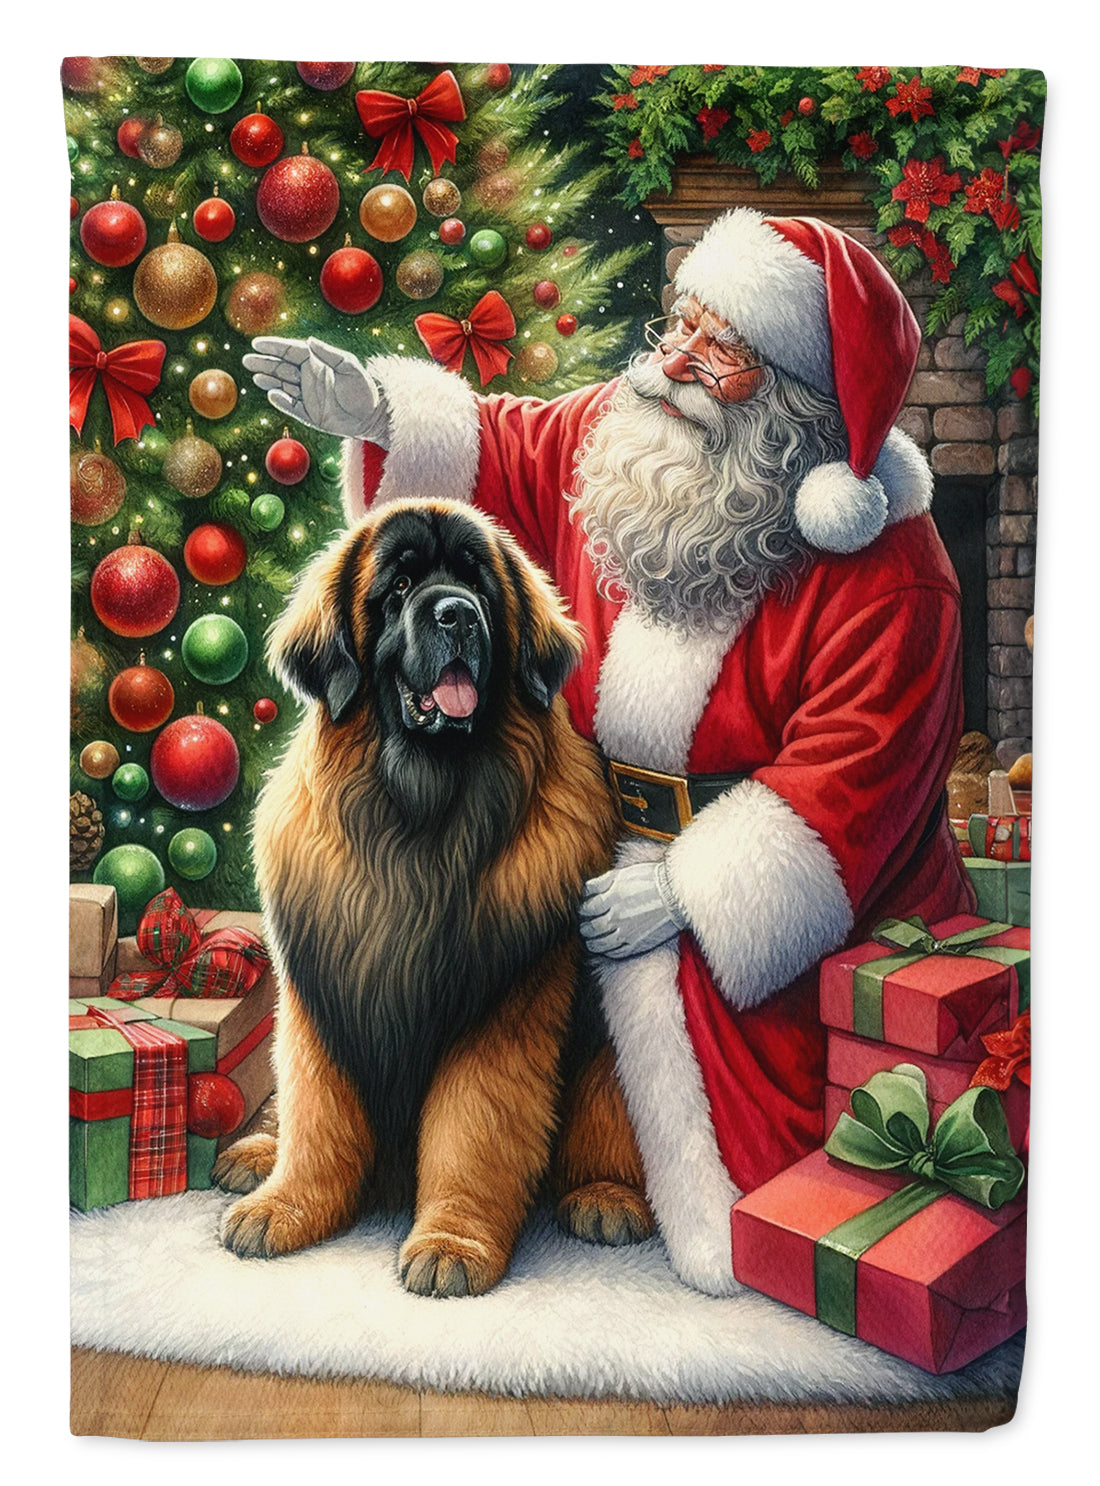 Buy this Leonberger and Santa Claus Garden Flag